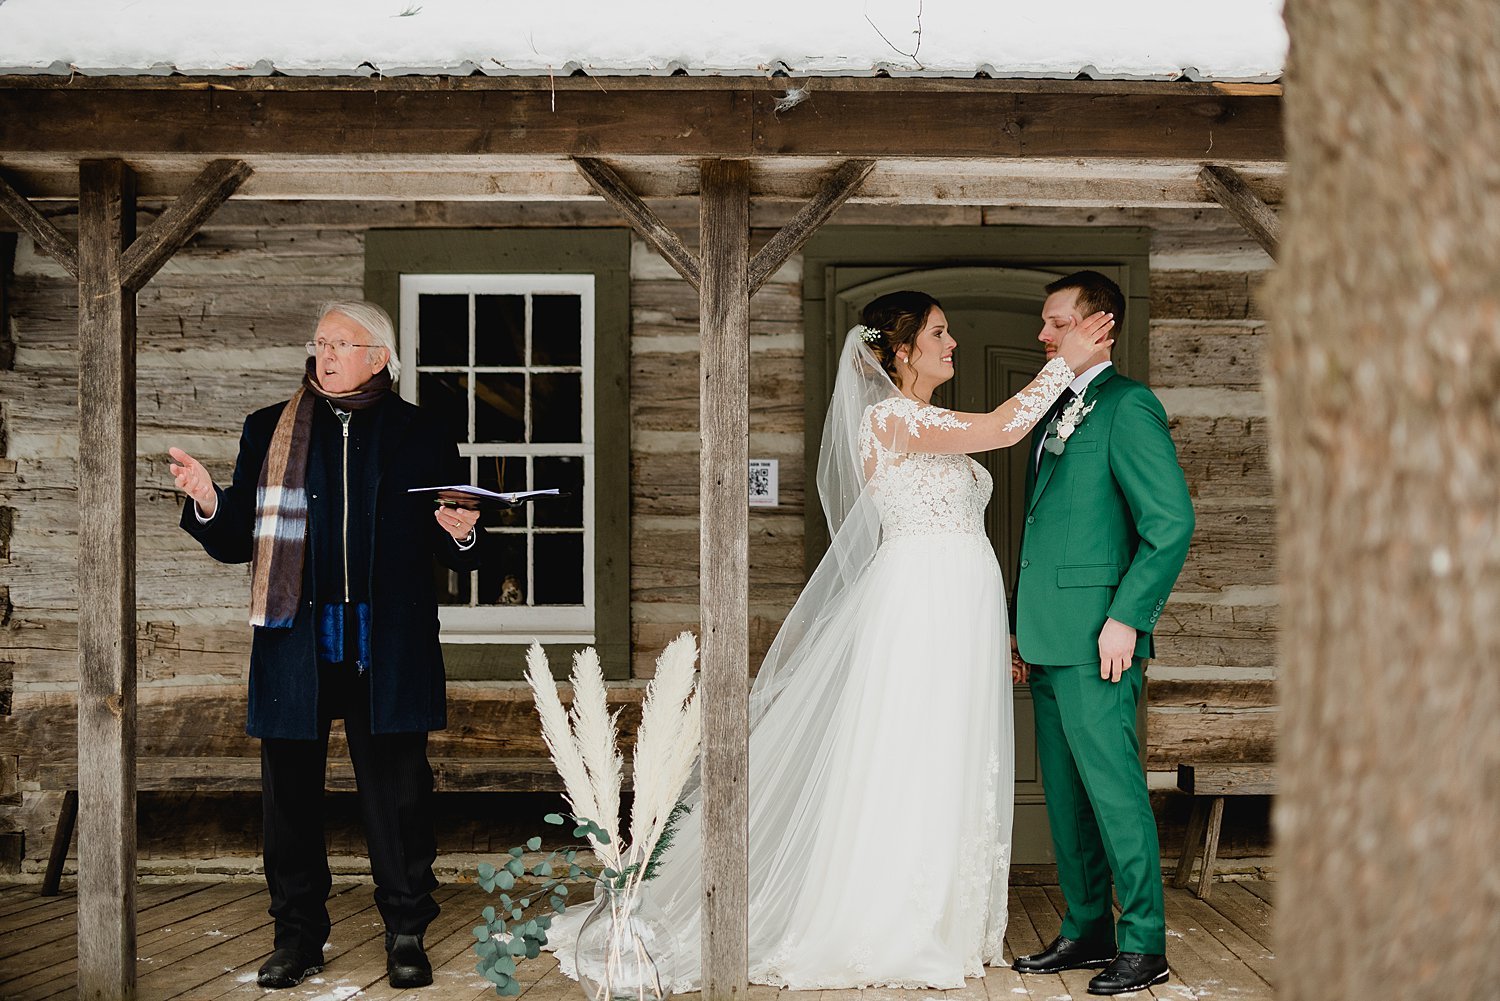 Intimate Winter Elopement at O'Hara Mill Homestead in Madoc, Ontario | Prince Edward County Wedding Photographer | Holly McMurter Photographs_0017.jpg